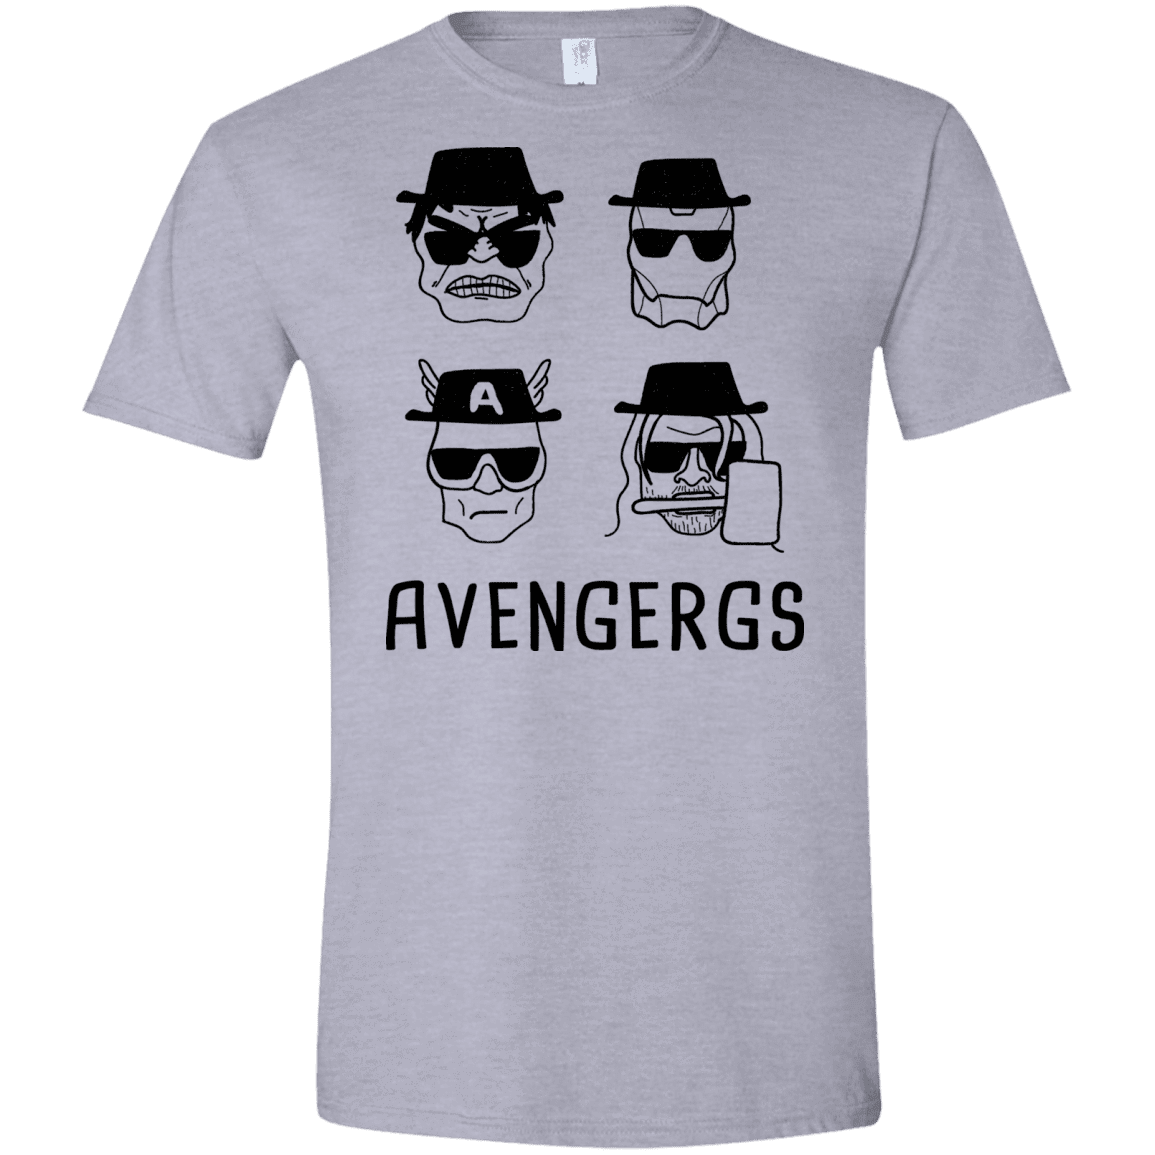 T-Shirts Sport Grey / X-Small Avengergs Men's Semi-Fitted Softstyle